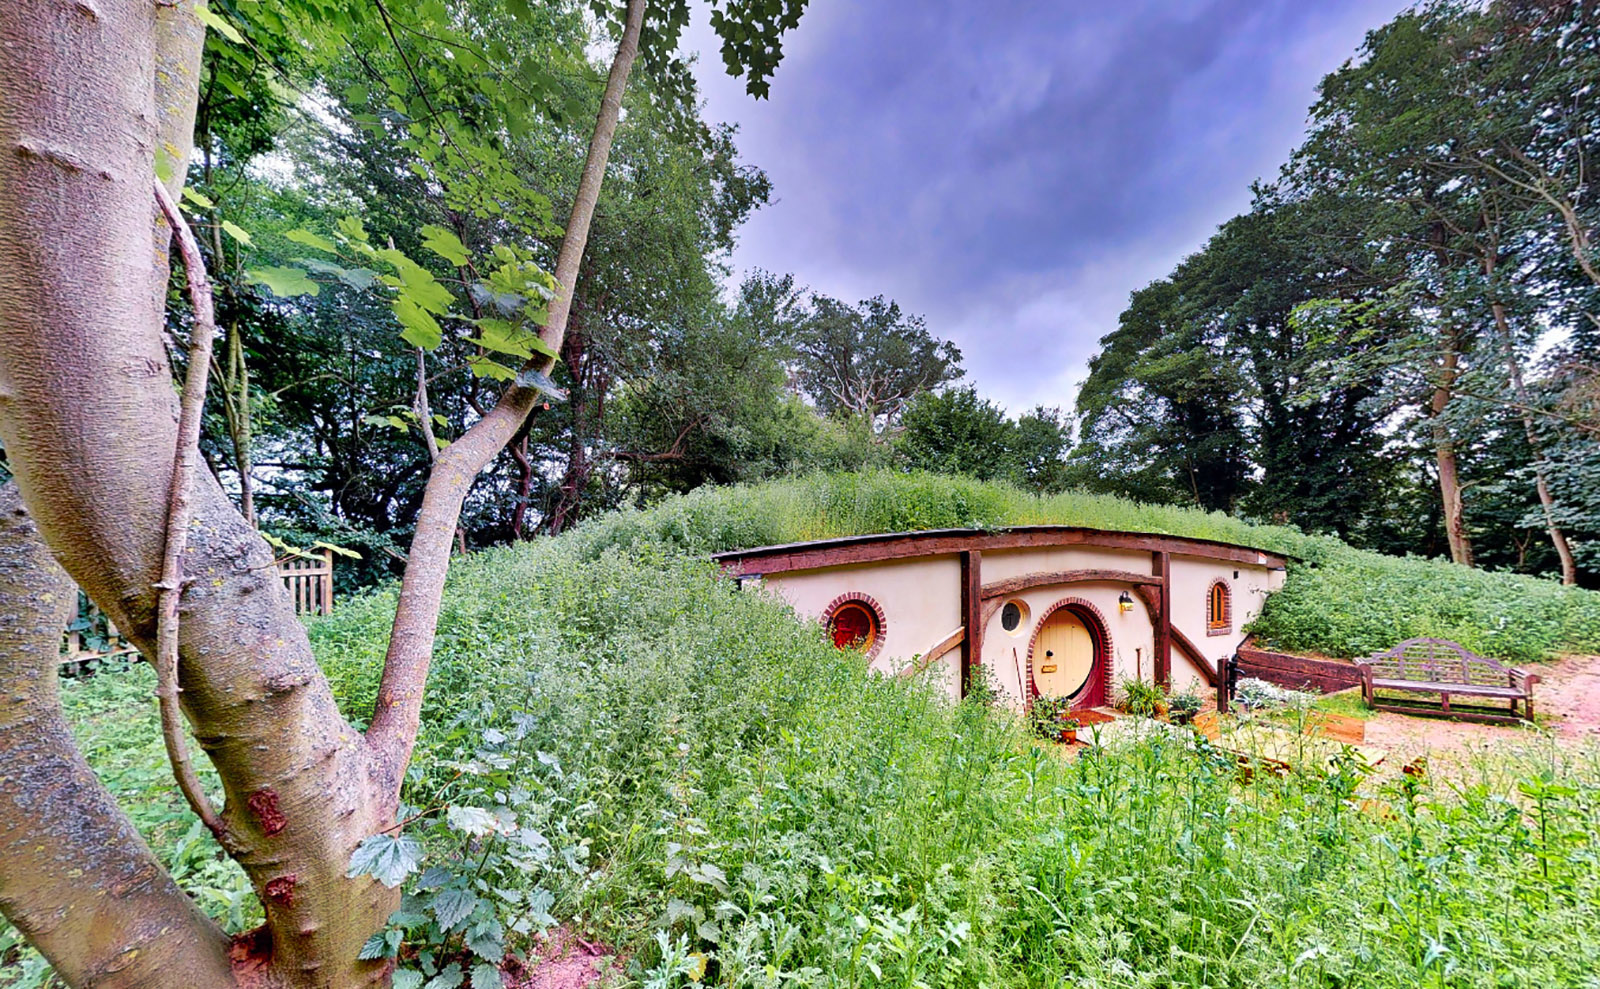 A Real Hobbit House, Booksellers Documentary, Online Austen Exhibit & More: Endnotes 15 May